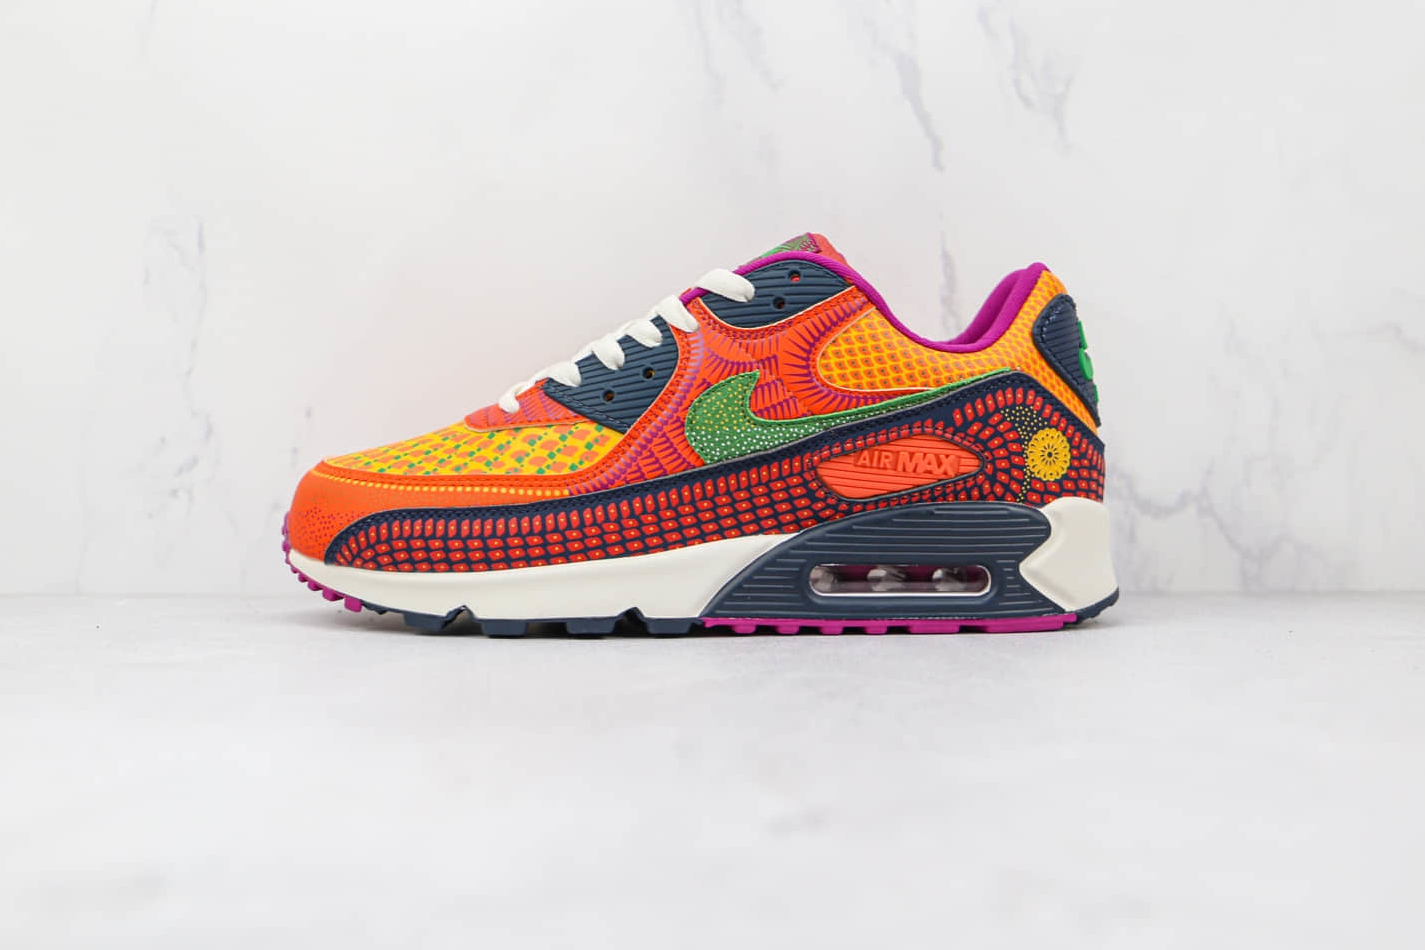 Nike Air Max 90 'Día de Muertos' DC5154-458: Limited Edition Design for Day of the Dead Celebration